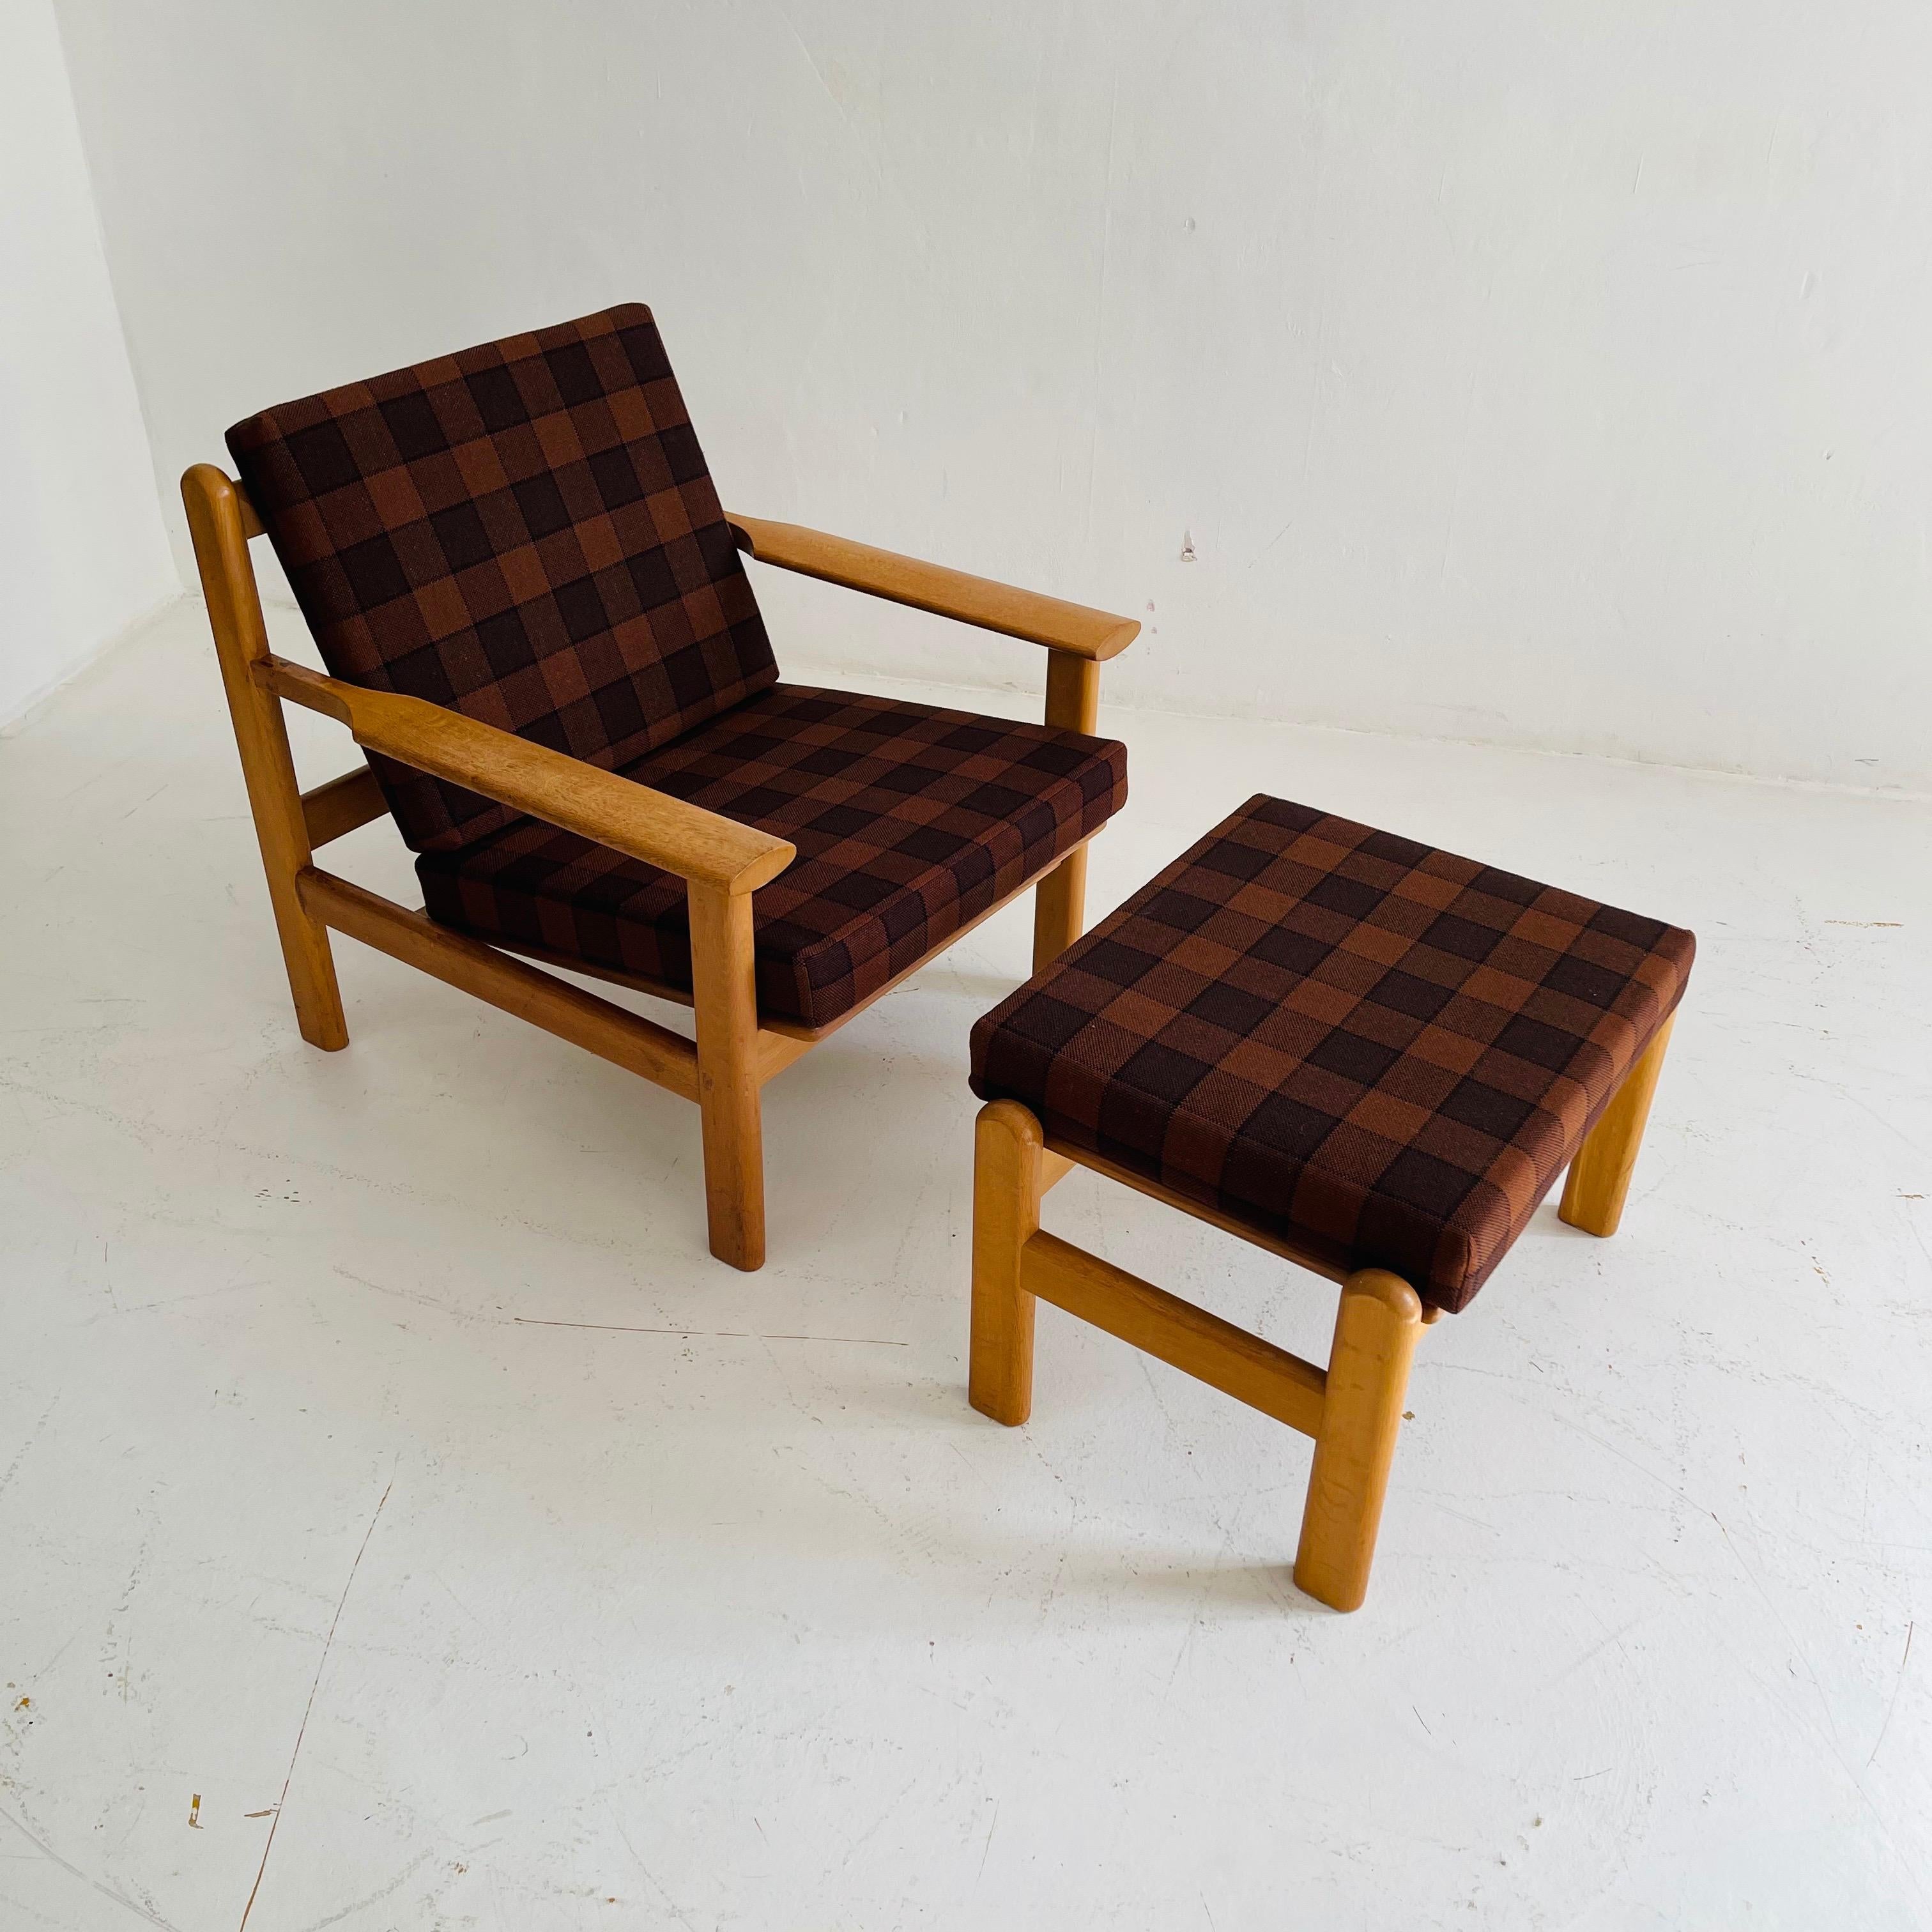 Living Room Suite Sofa Lounge Chair by Poul Volther for Frem Rølje, Denmark 1950 For Sale 5